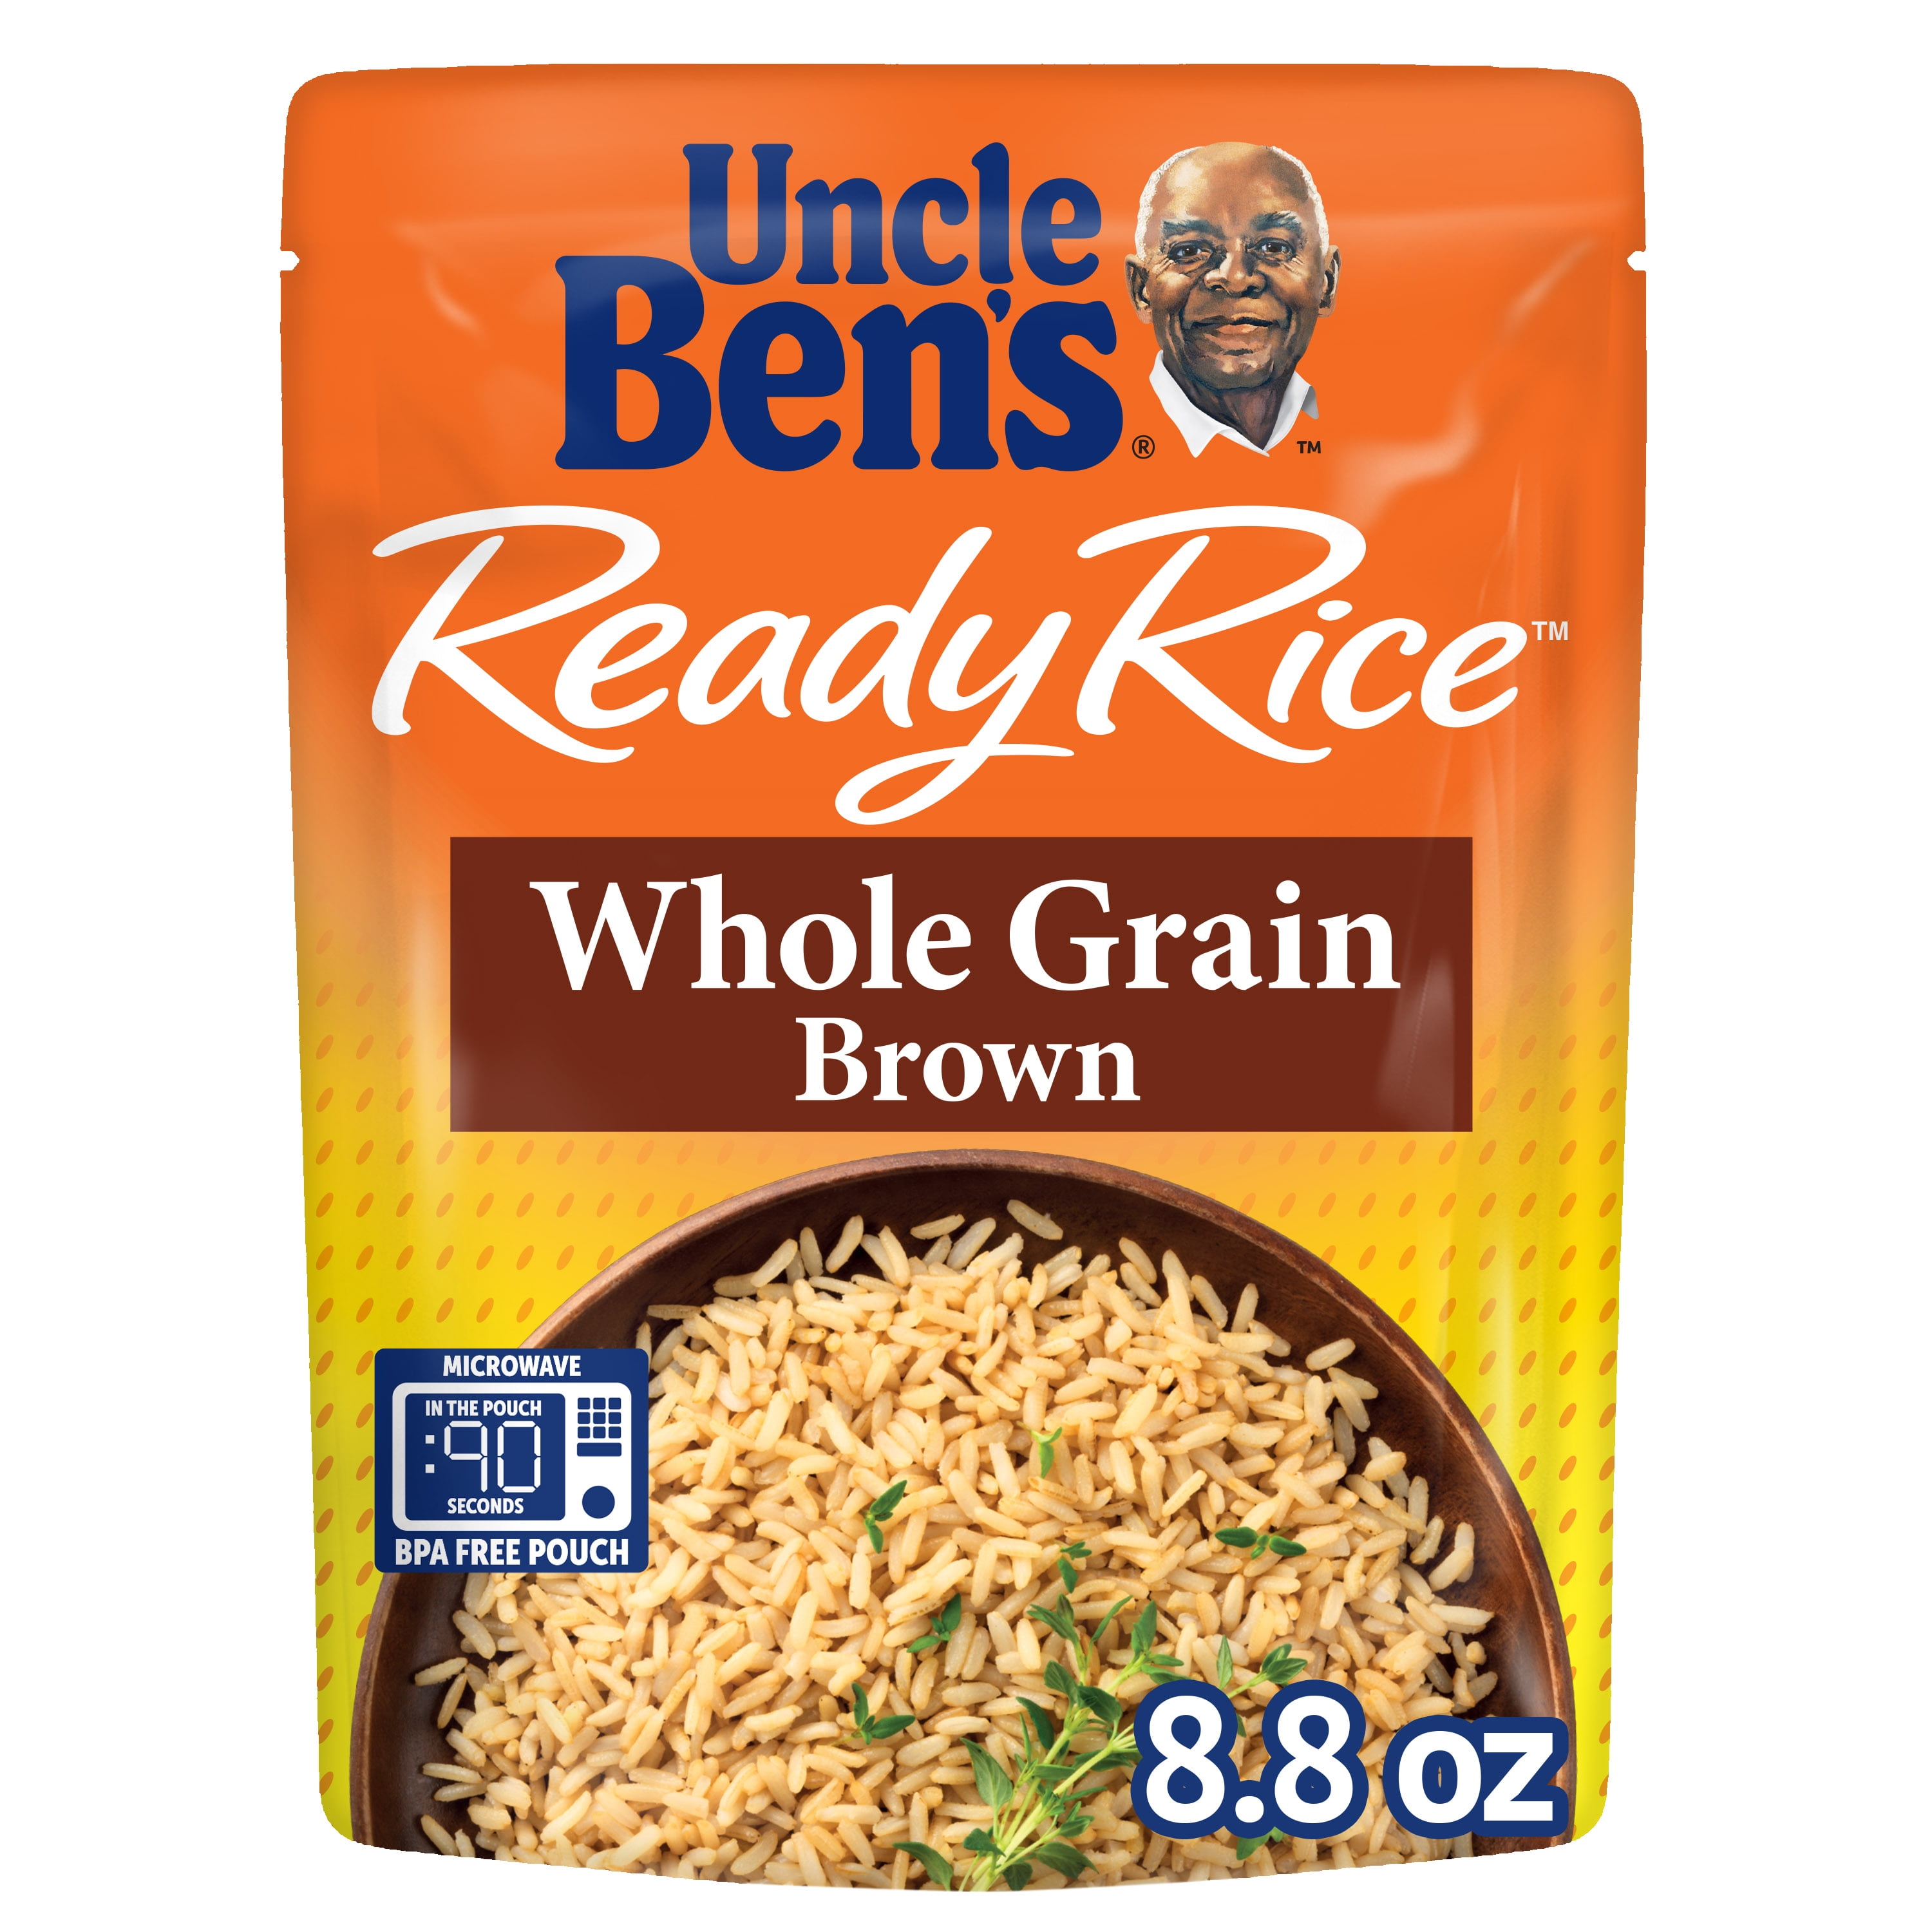 Uncle Bens Ready Rice Rice, Whole Grain Brown - 8.8 oz